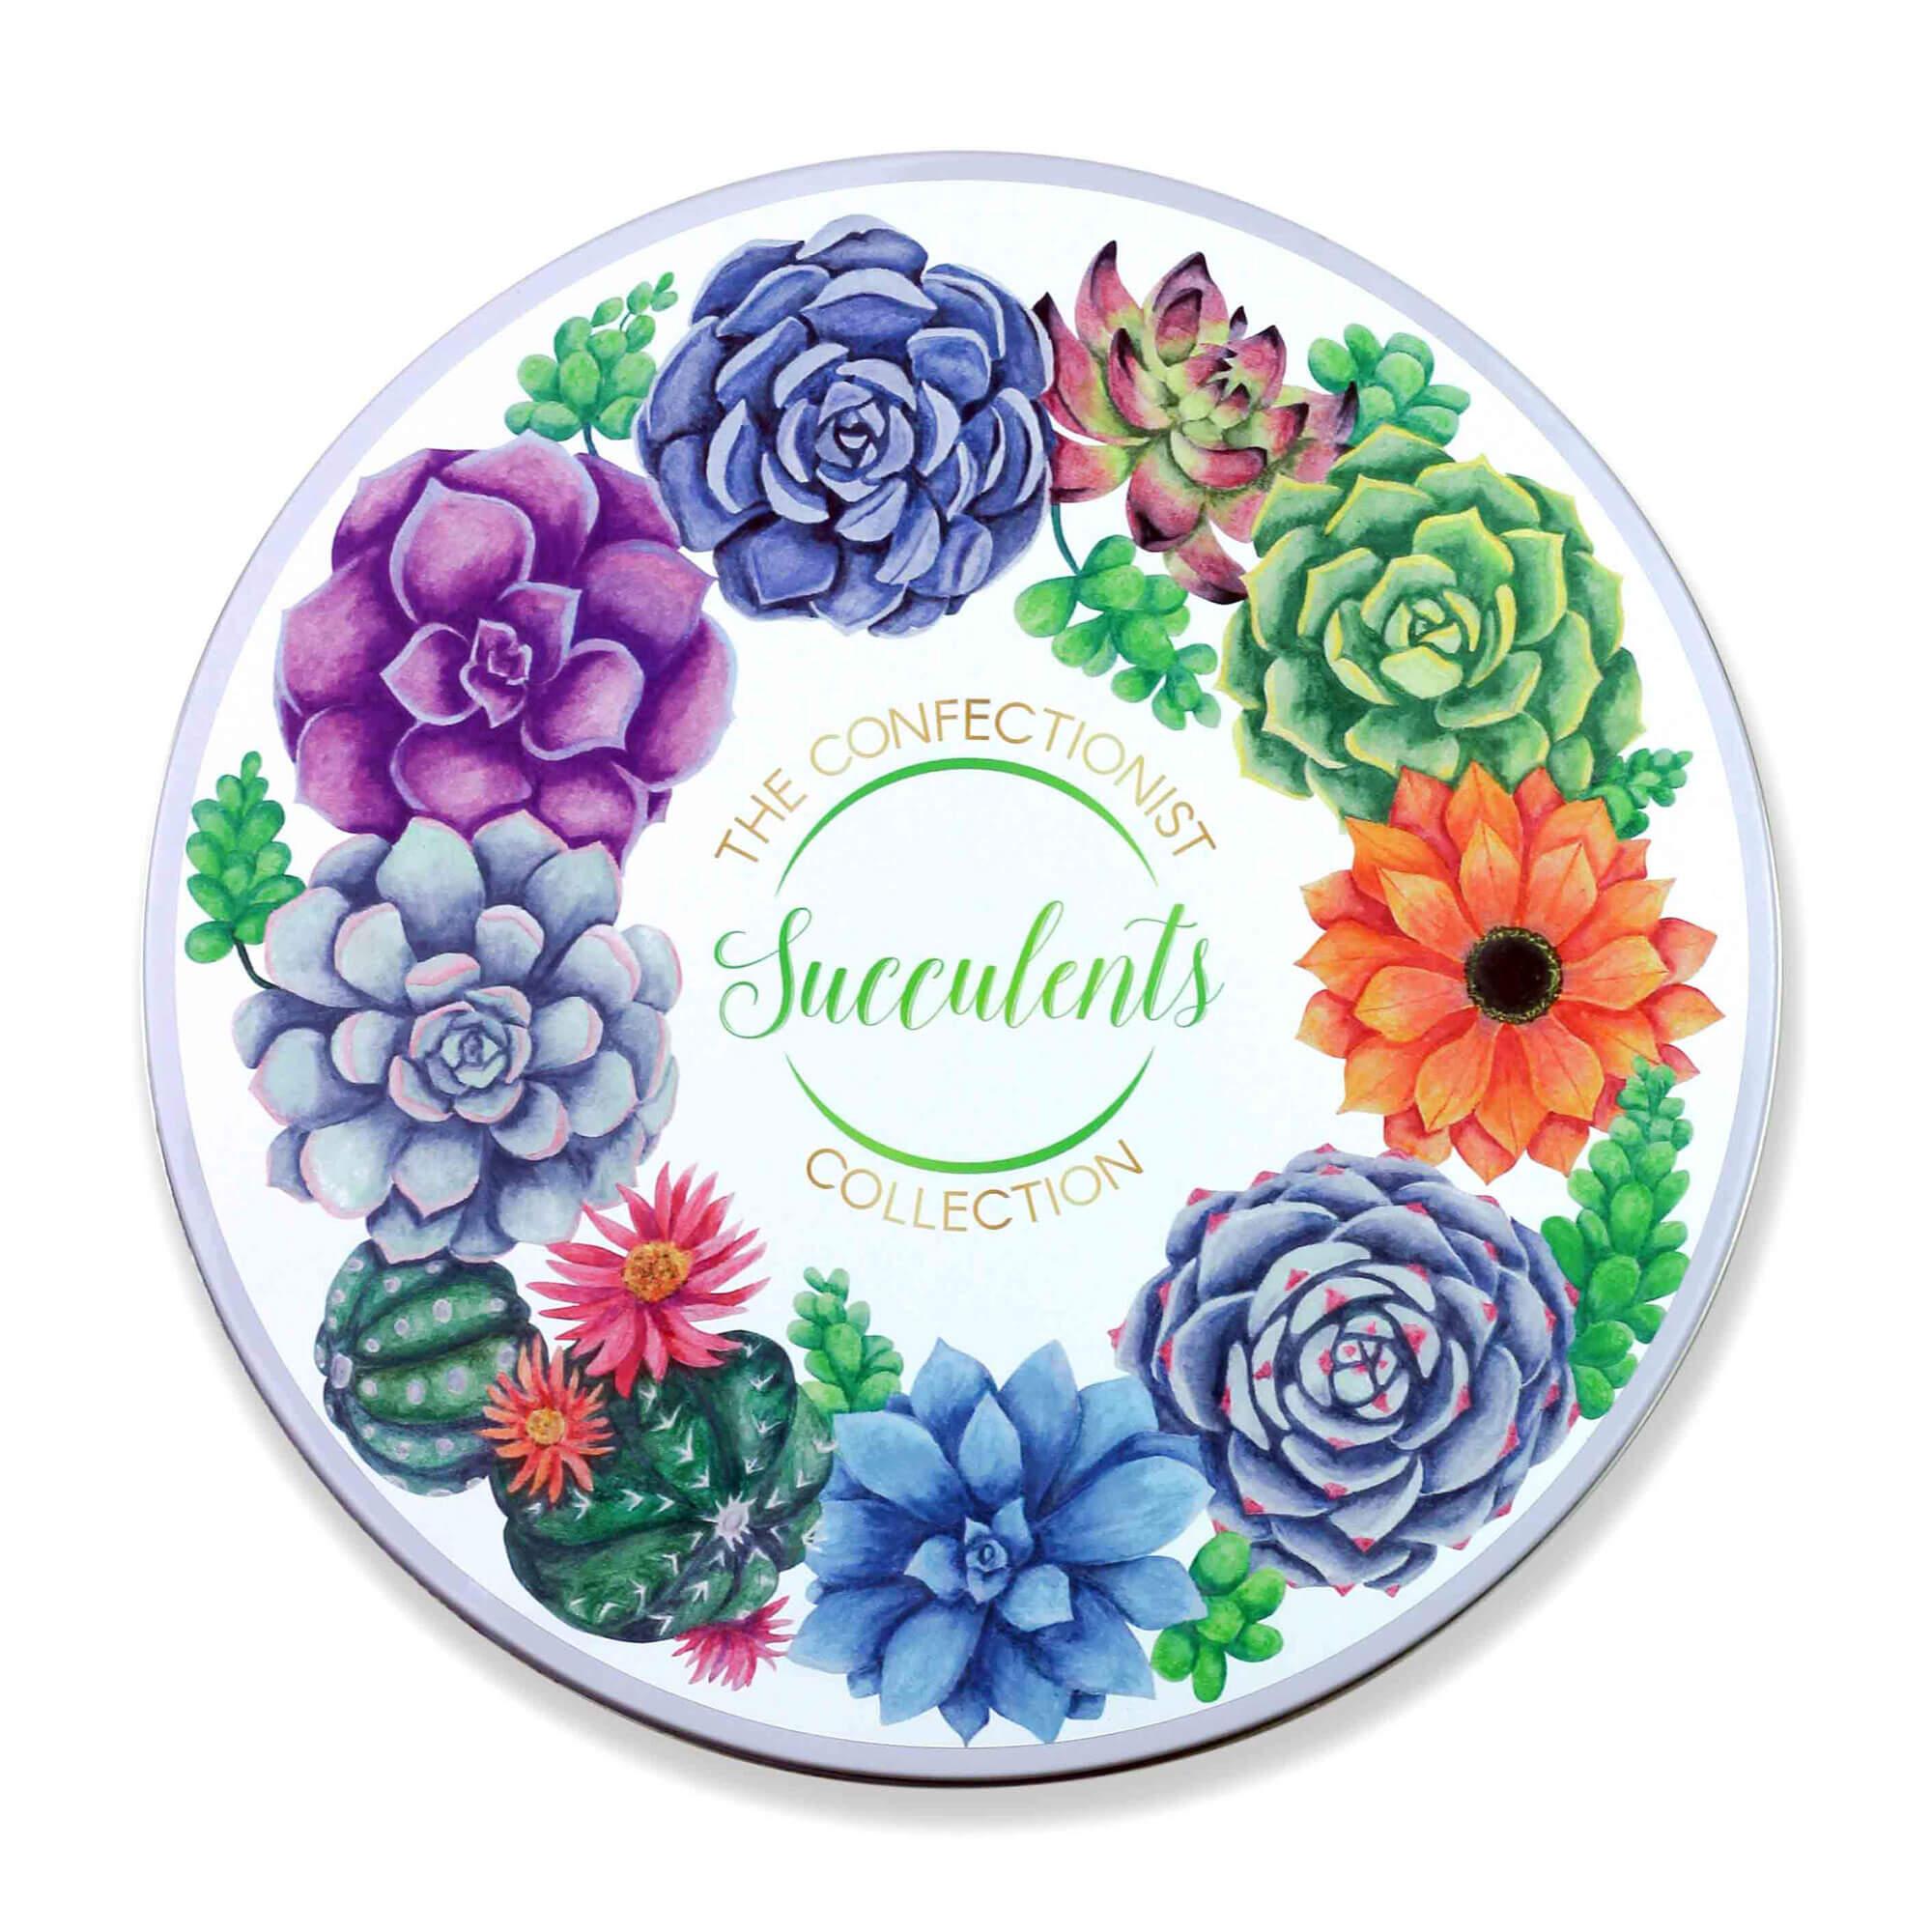 Product: Handmade Biscuit Succulents Collection - The Confectionist